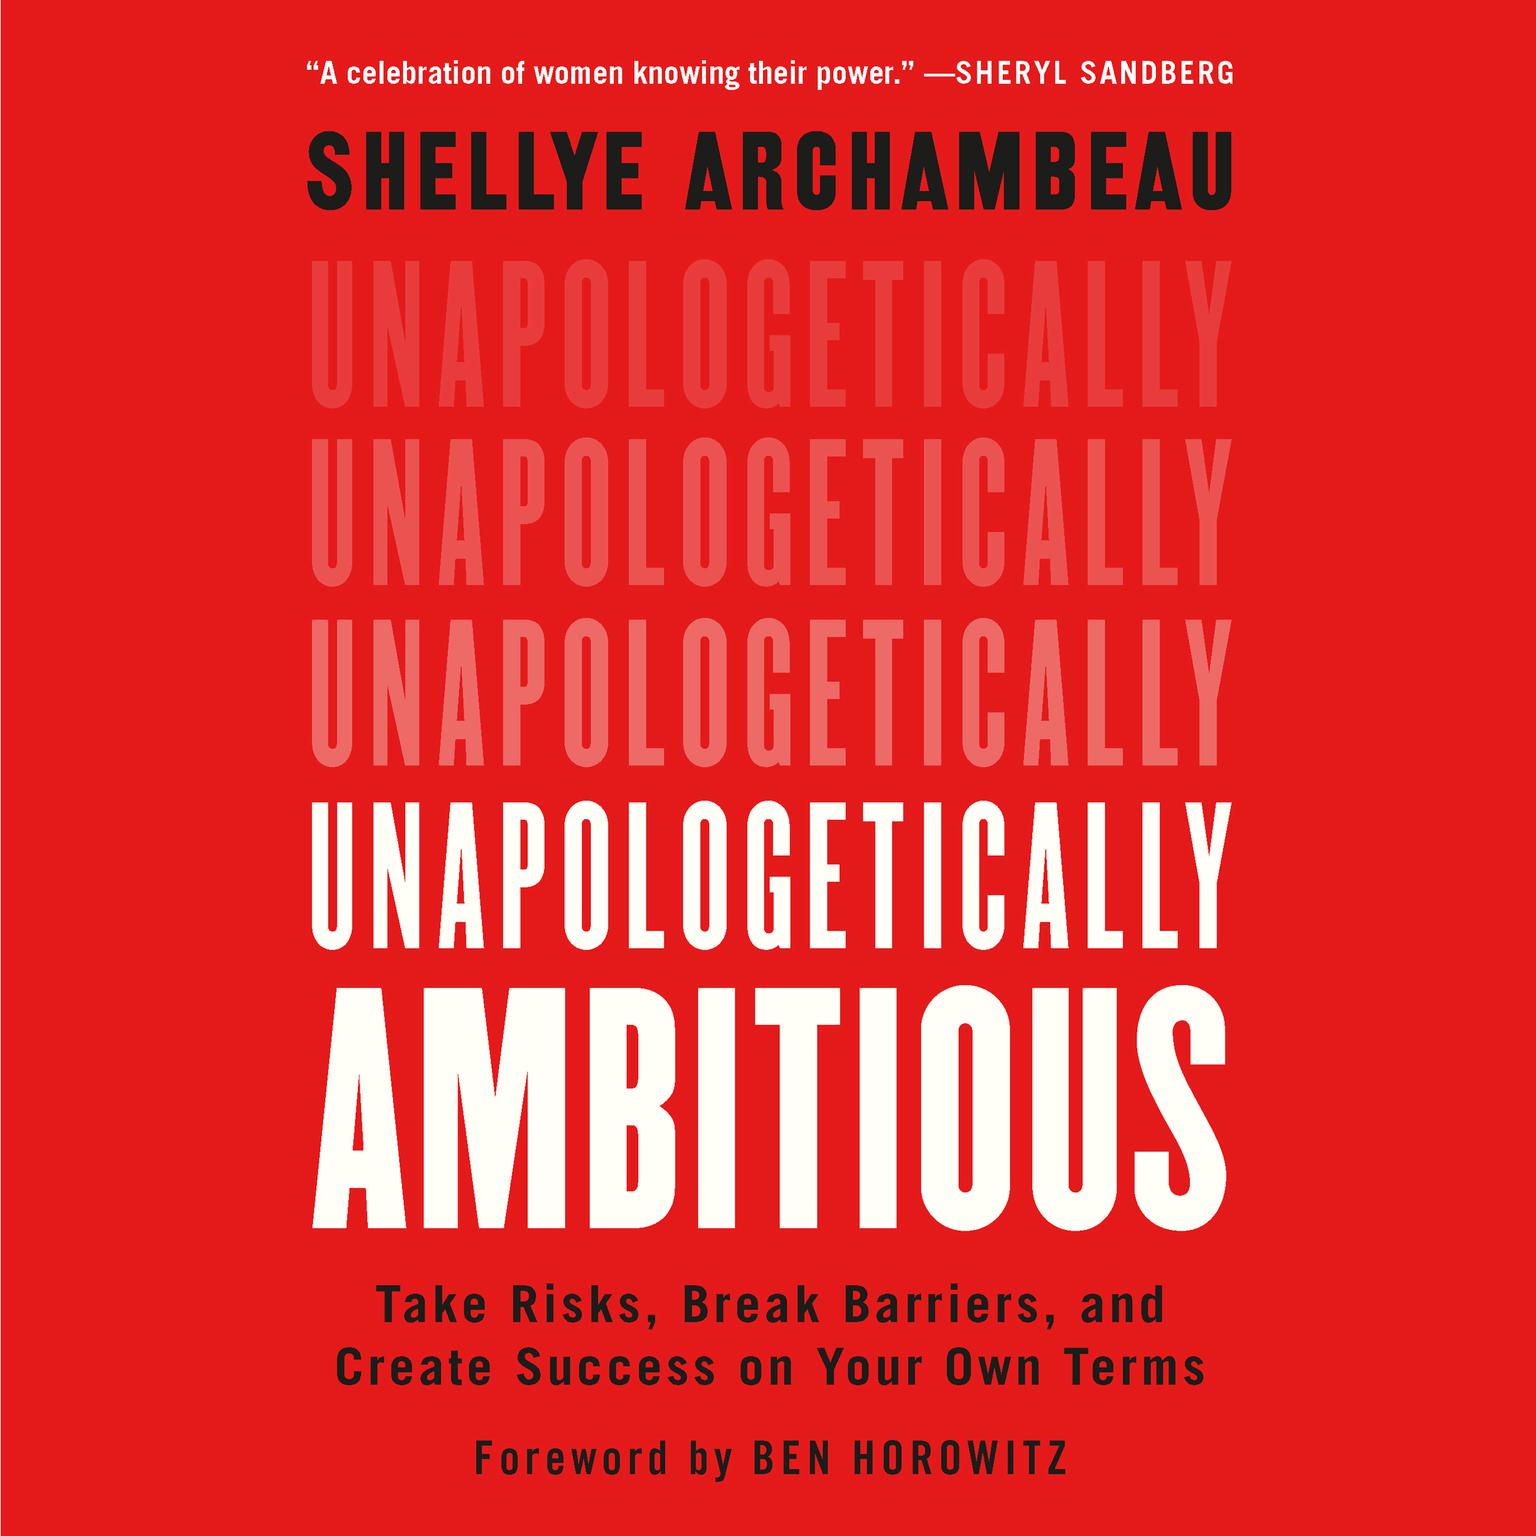 Unapologetically Ambitious: Take Risks, Break Barriers, and Create Success on Your Own Terms Audiobook, by Shellye Archambeau